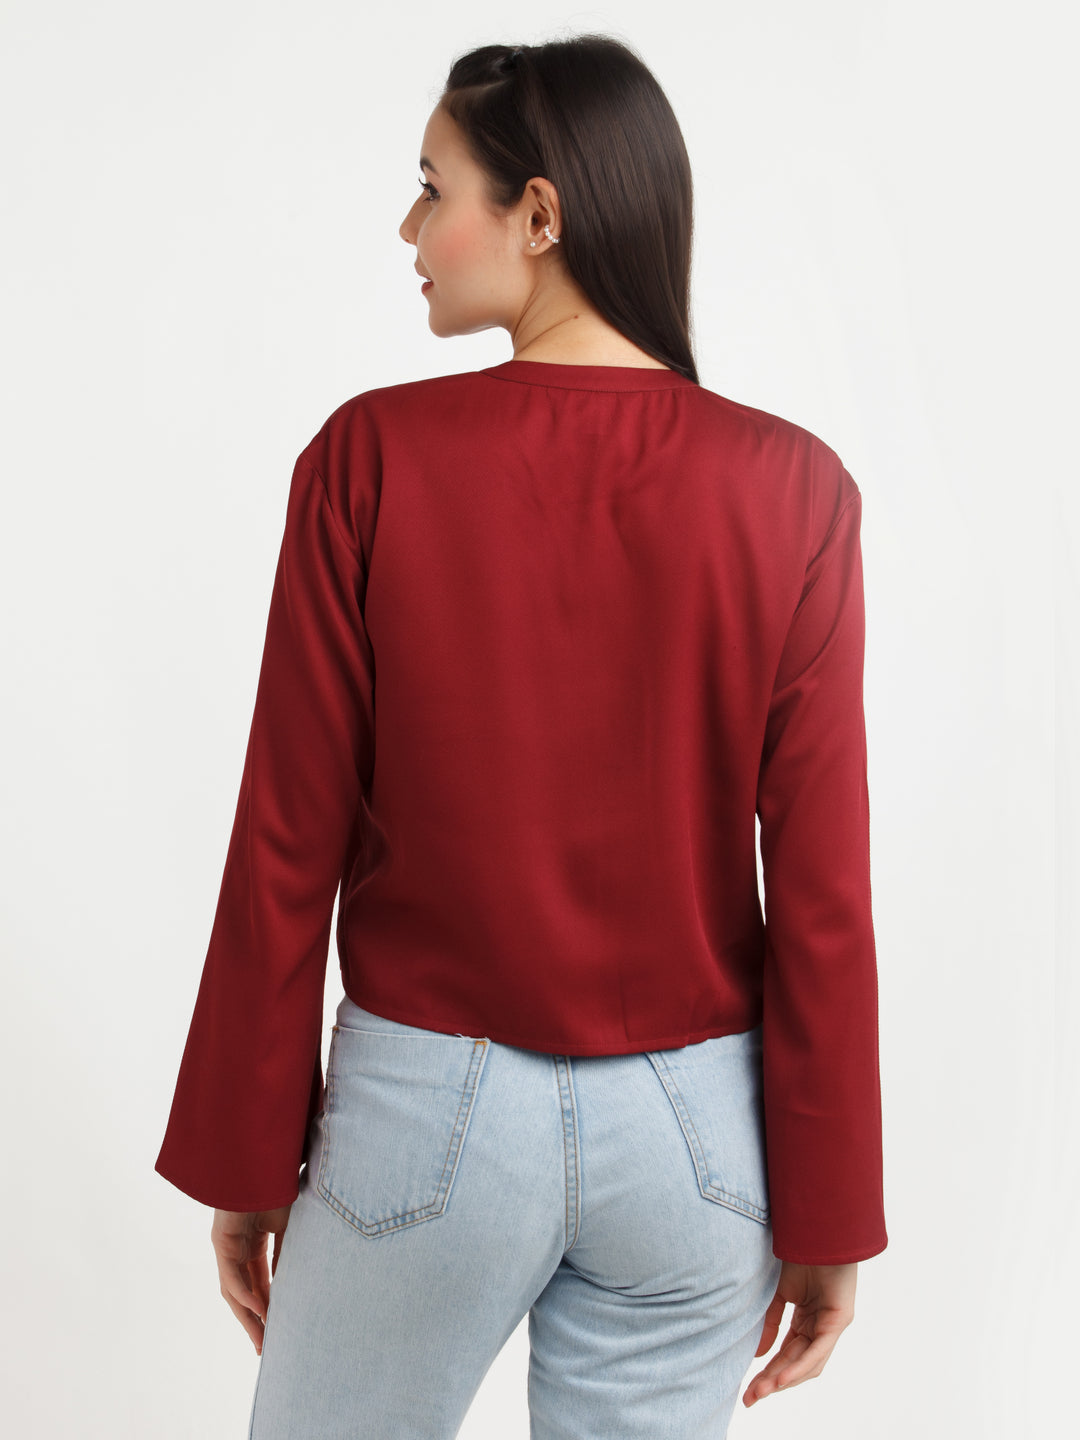 Solid-Polyester-Top-VT02985_137-Maroon-4